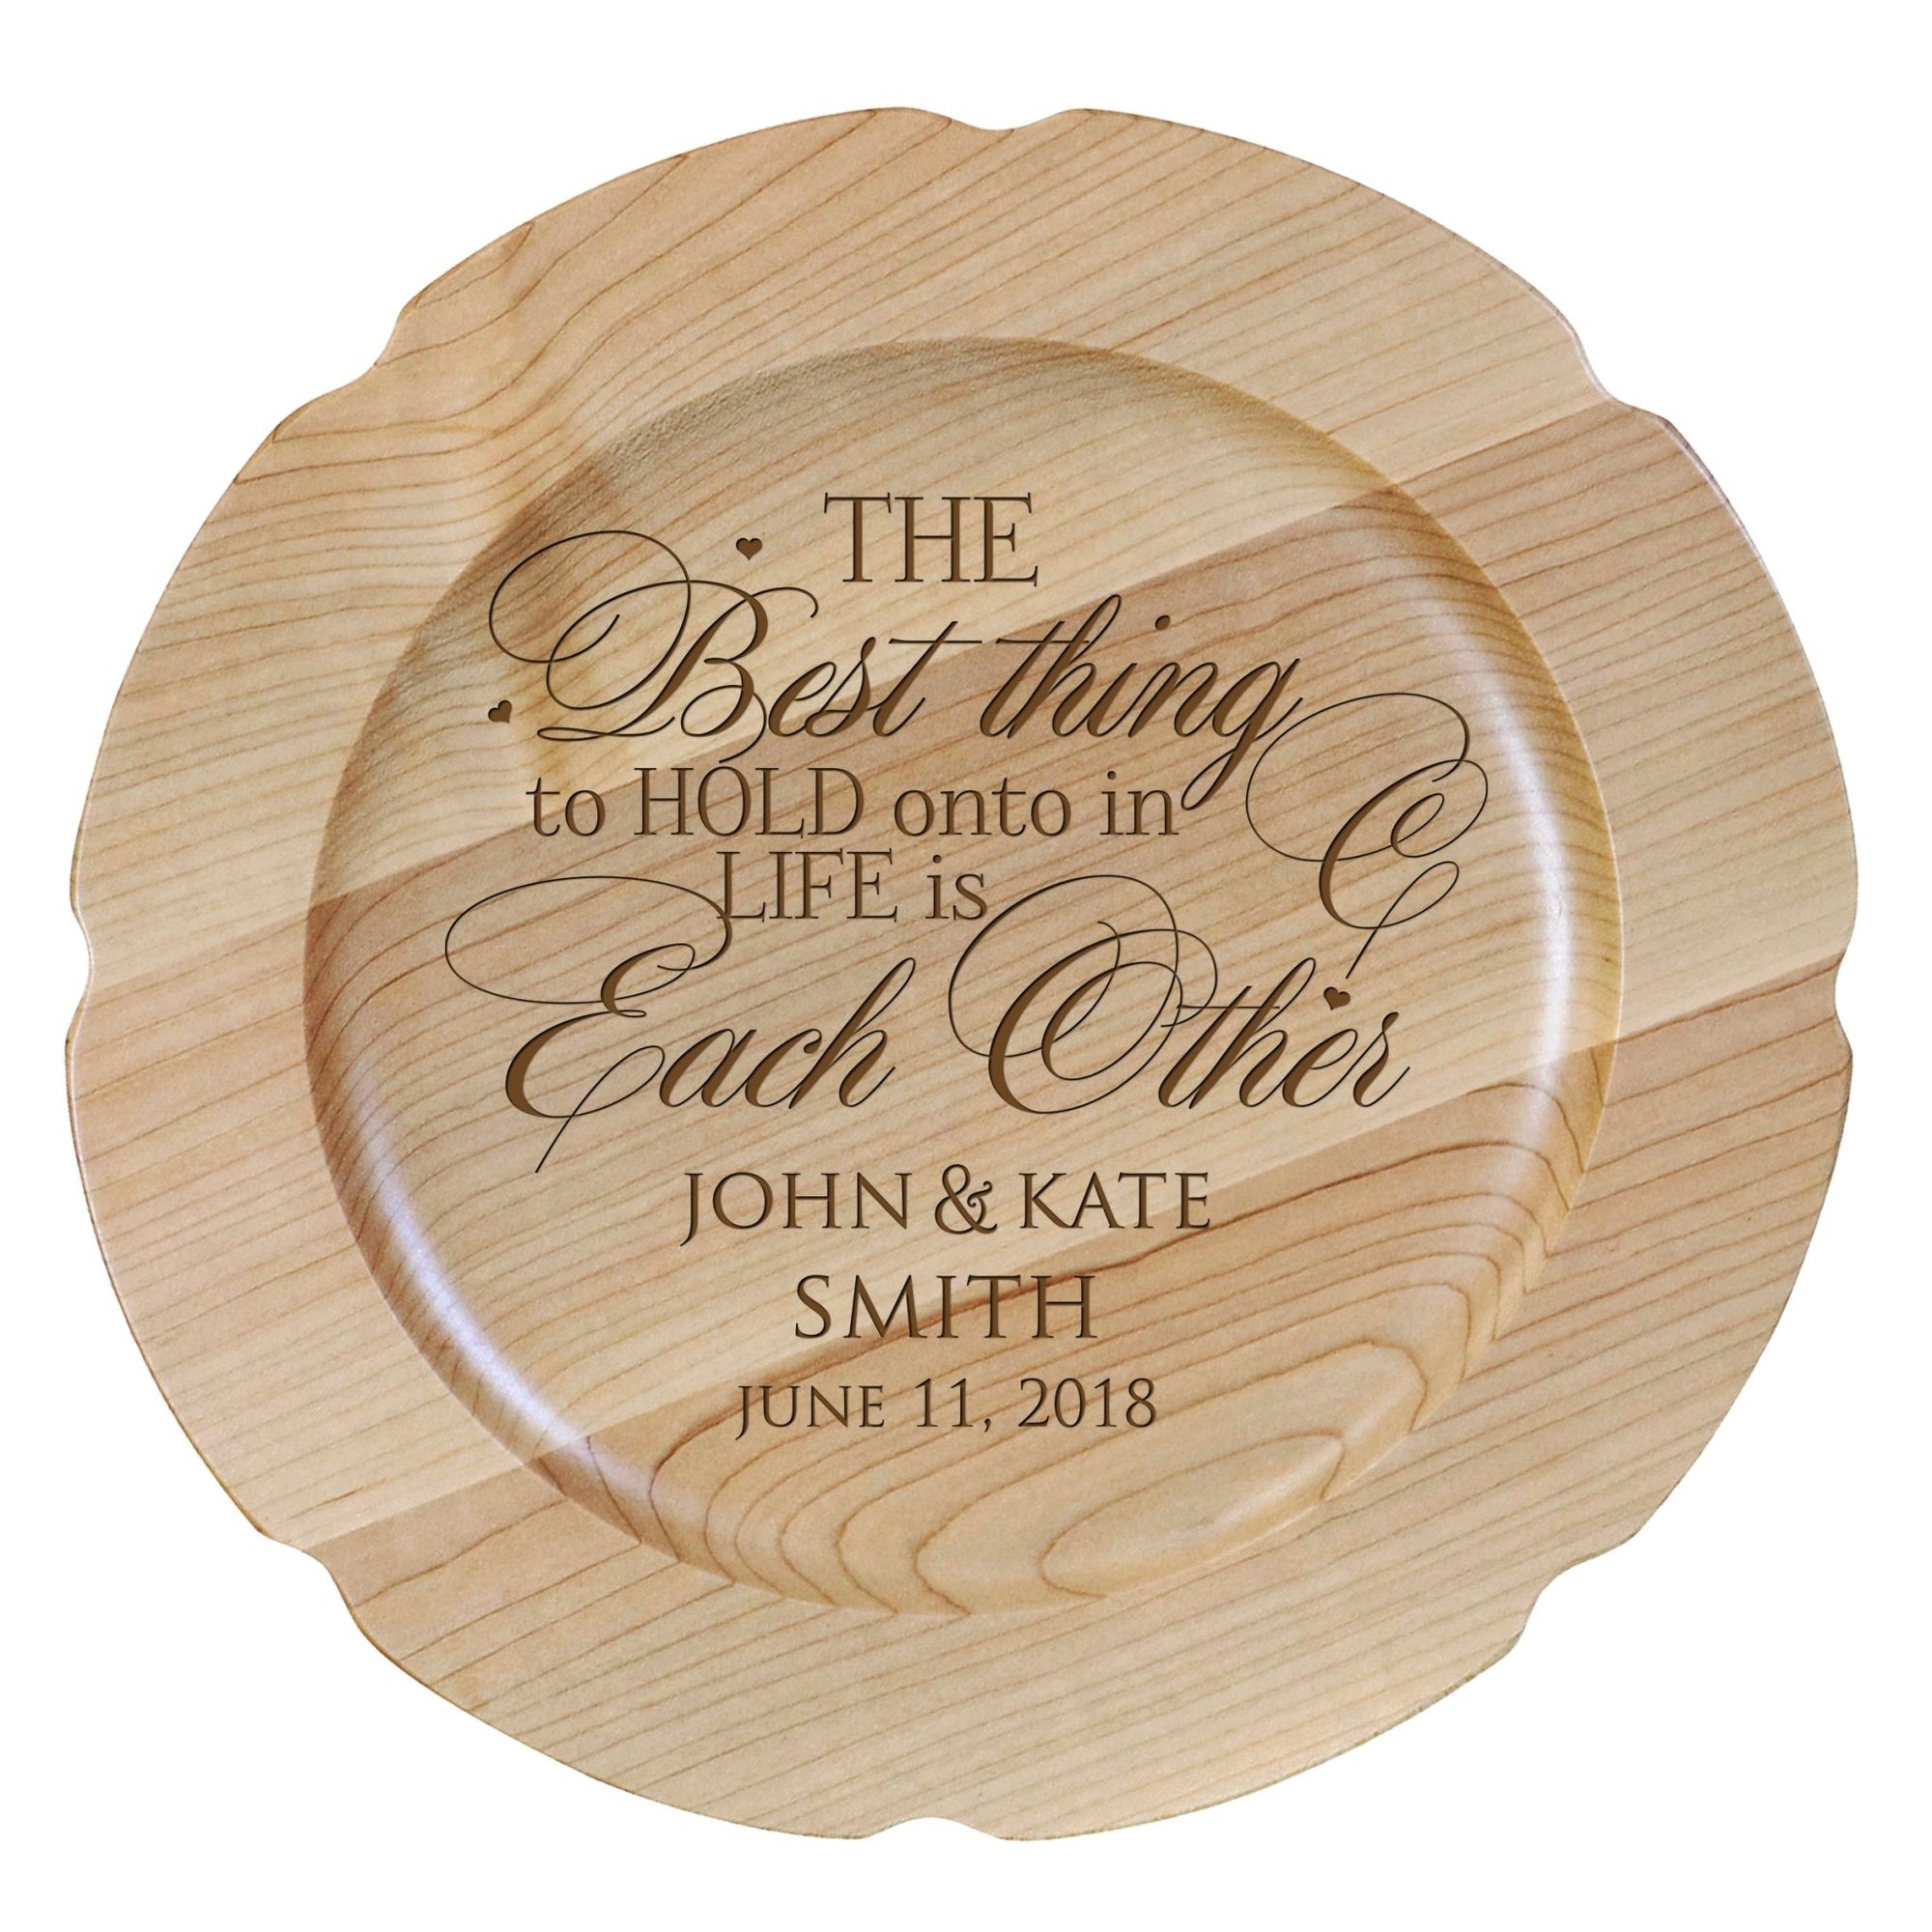 Personalized Inspirational Plates With Quotes - Best Thing - LifeSong Milestones